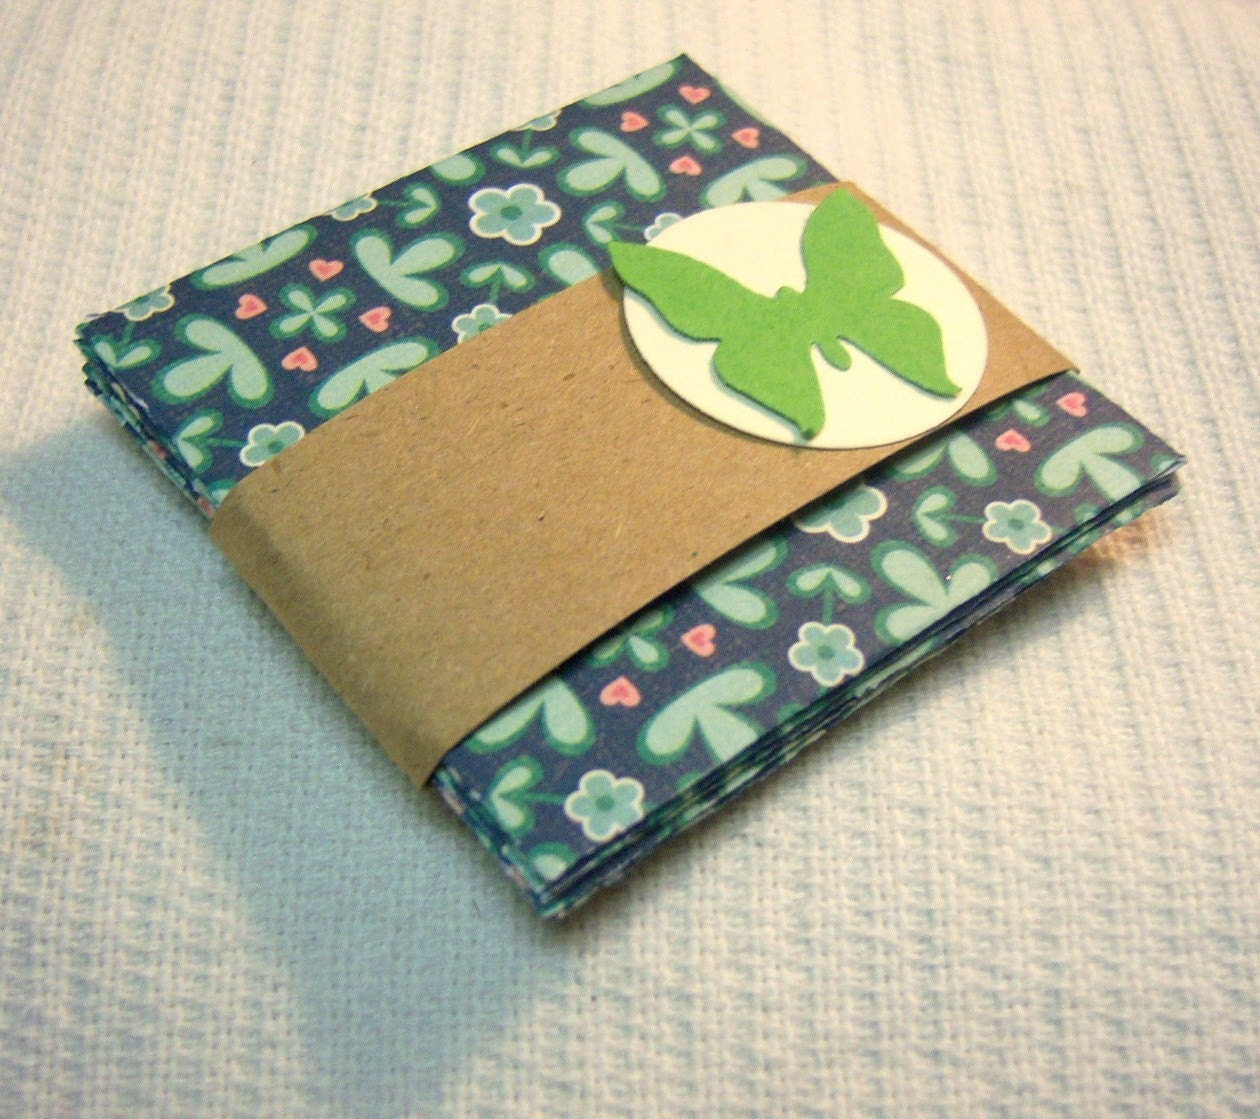 Set of 5 Mini Notecards with Envelopes 2 x 2 Green and Blue with Flowers and Hearts